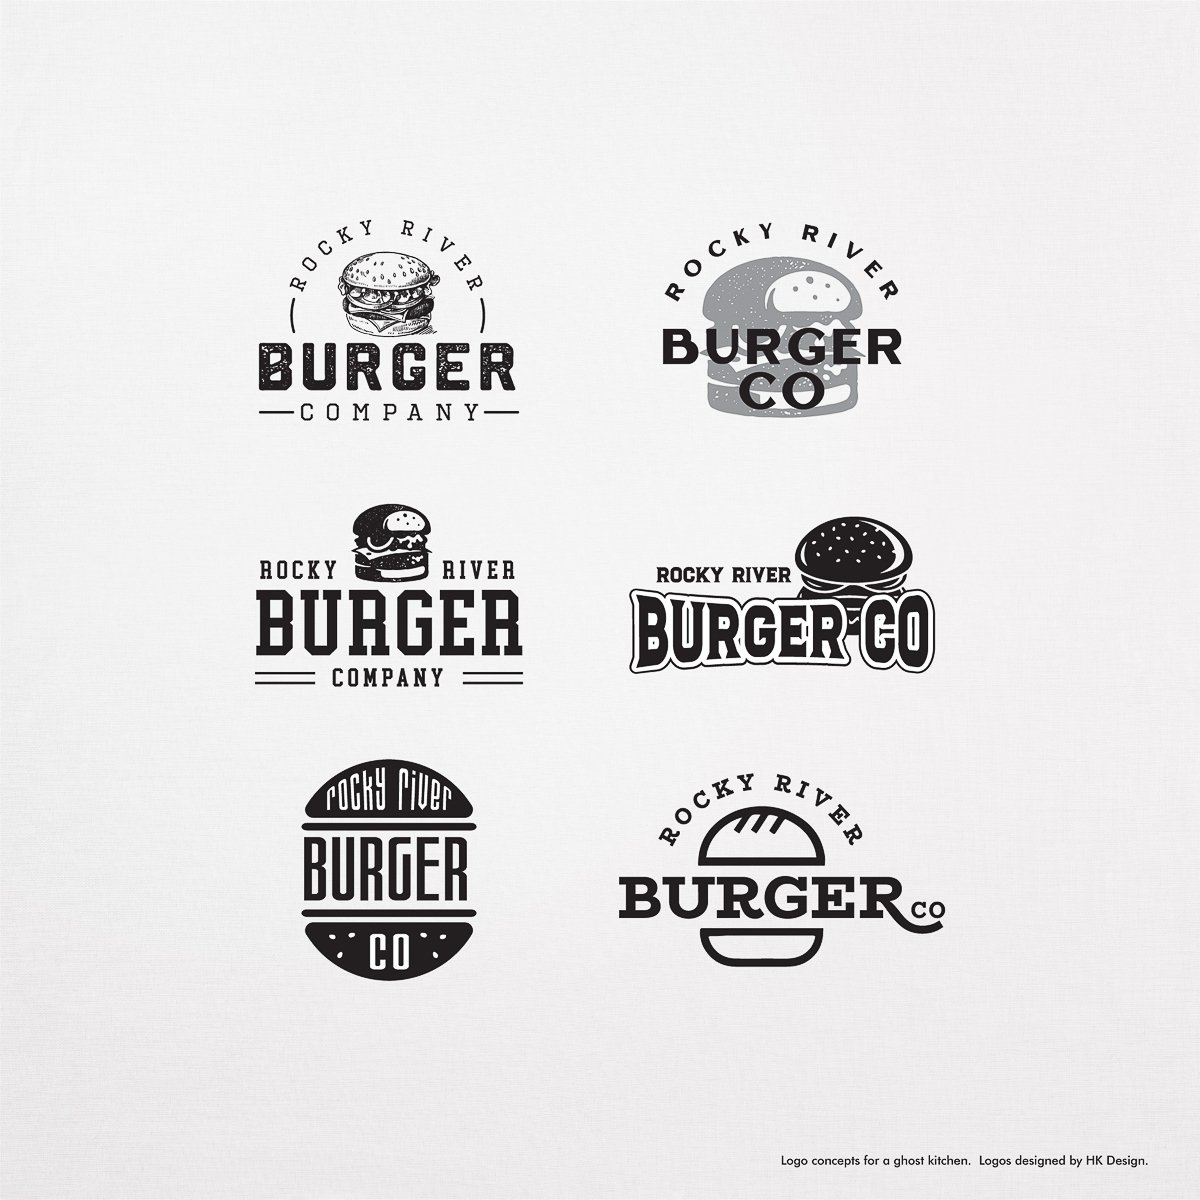 Logo concepts for ghost kitchen.